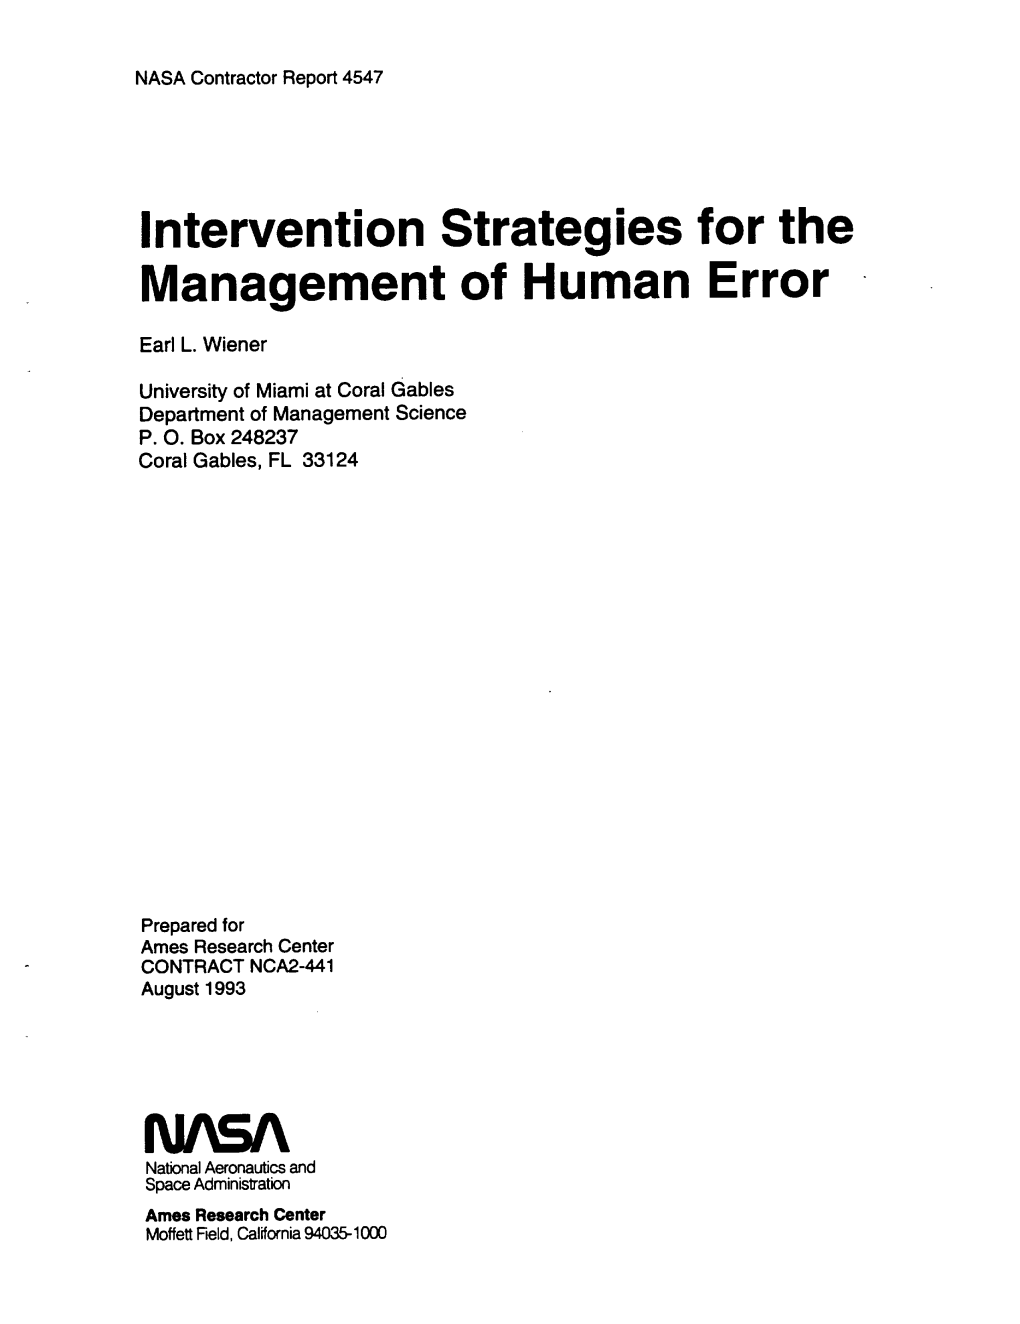 Intervention Strategies for the Management of Human Error